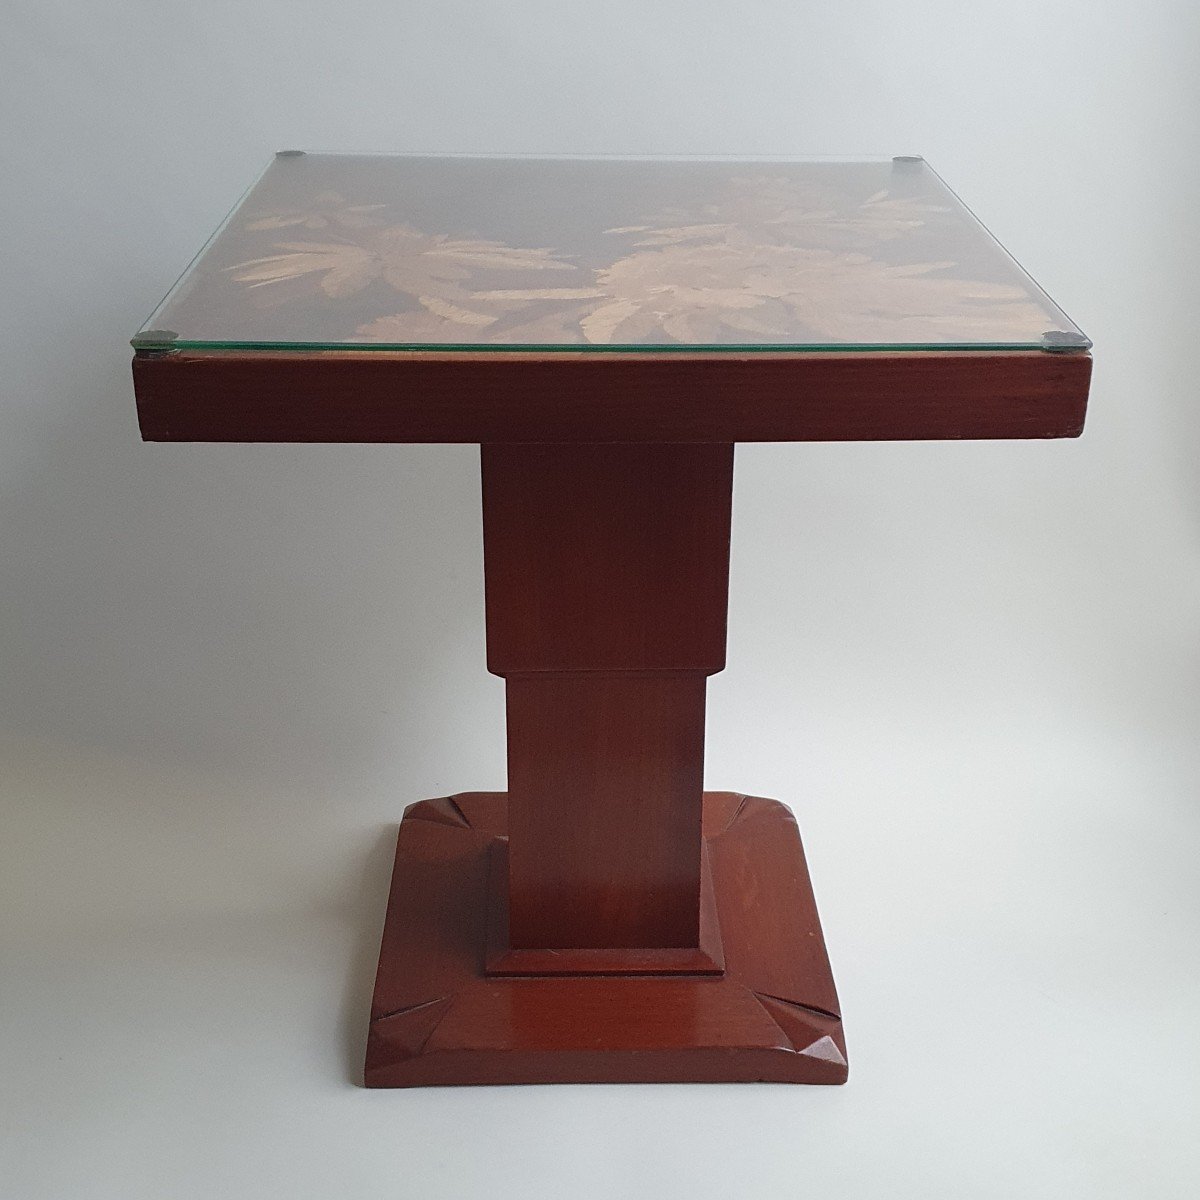 Emile Galle (1846-1904) A Table By Emile Galle , Maketry And Signed , Site Table-photo-3